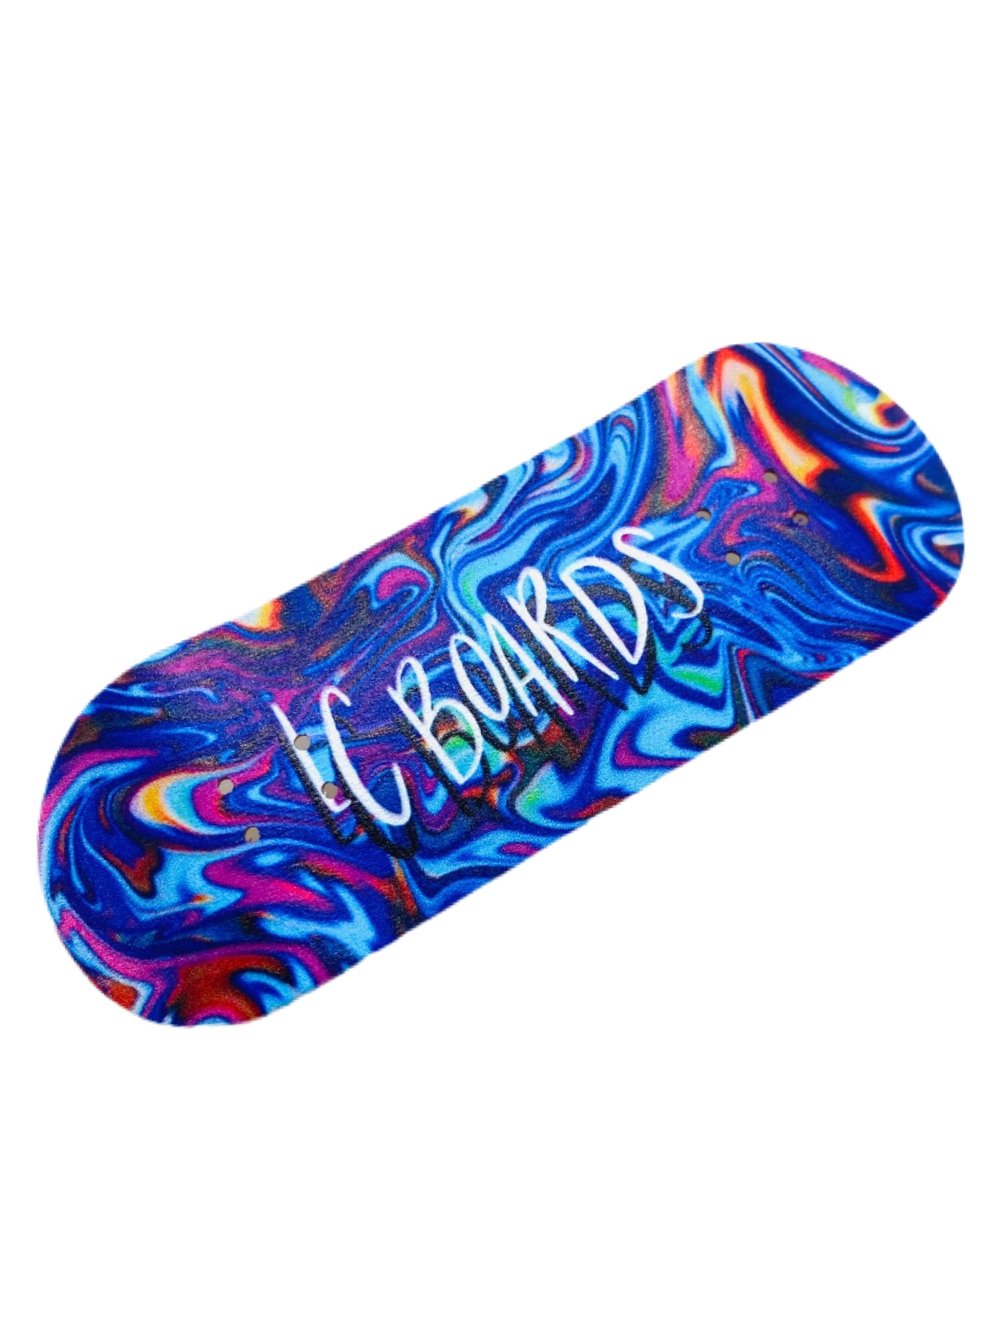 LC BOARDS Fingerboard 98x34 Hydro Graphic deck With Foam Grip Tape